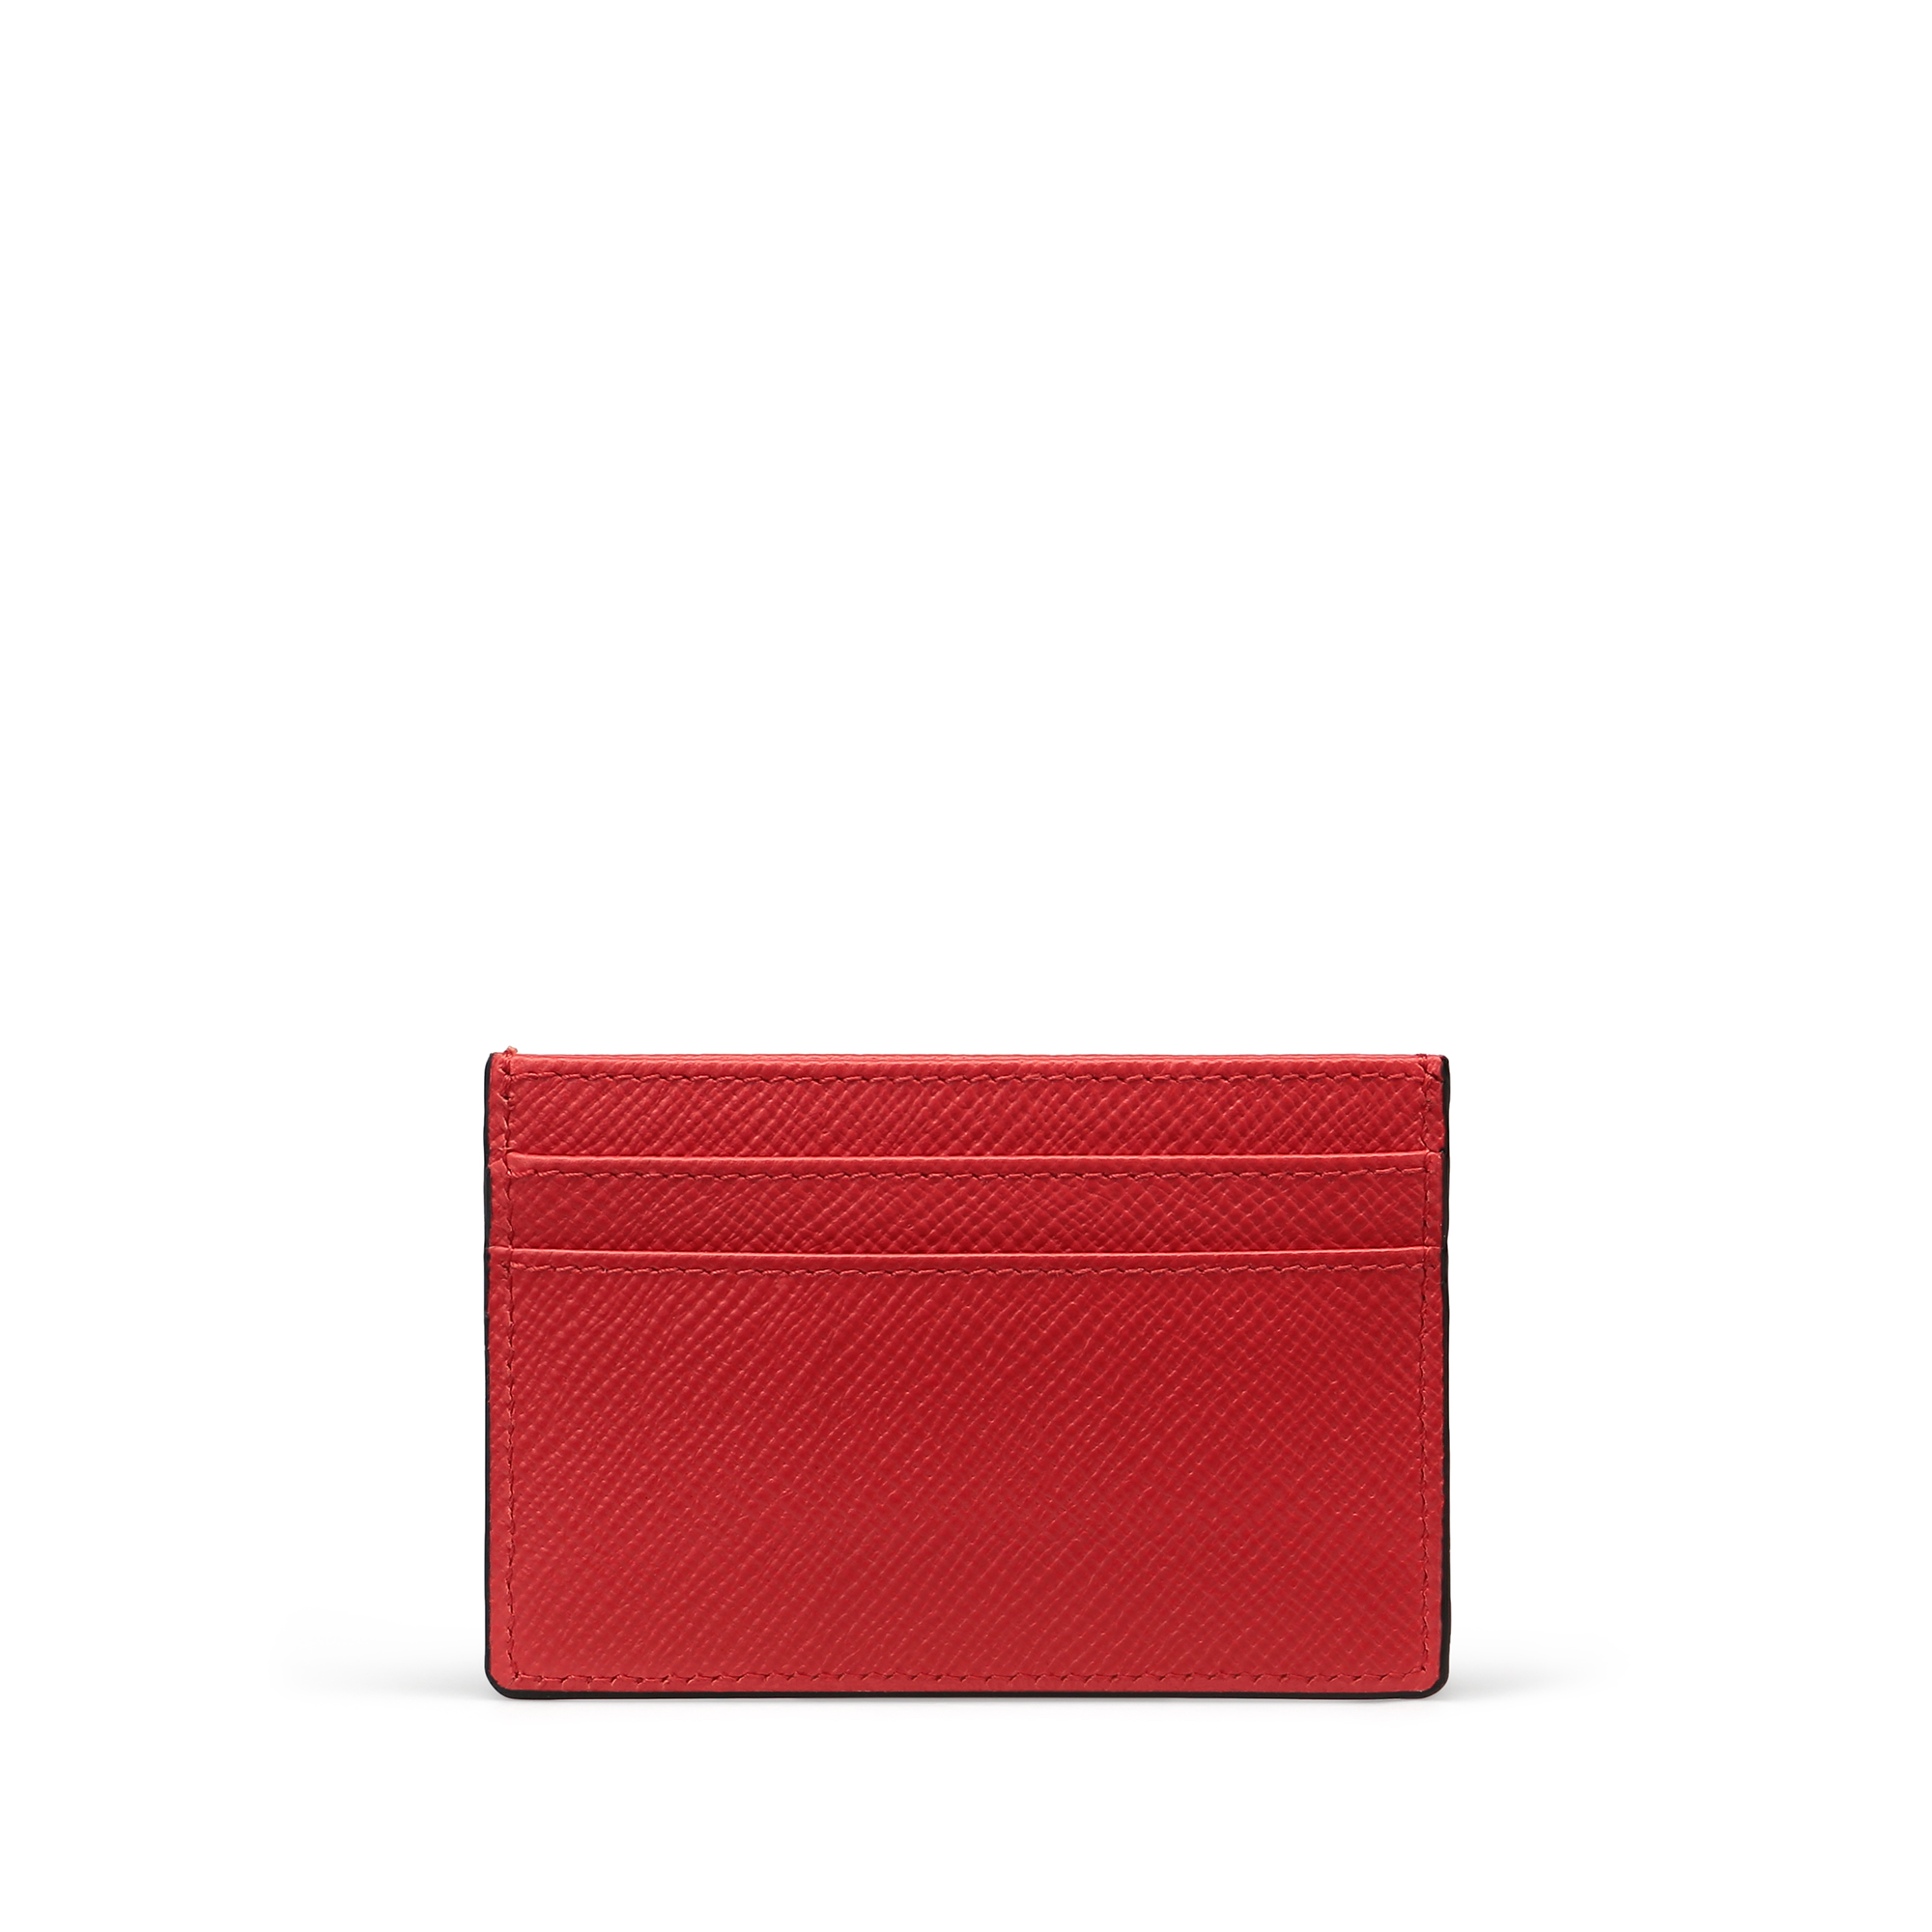 Flat Card Holder in Panama in scarlet red | Smythson